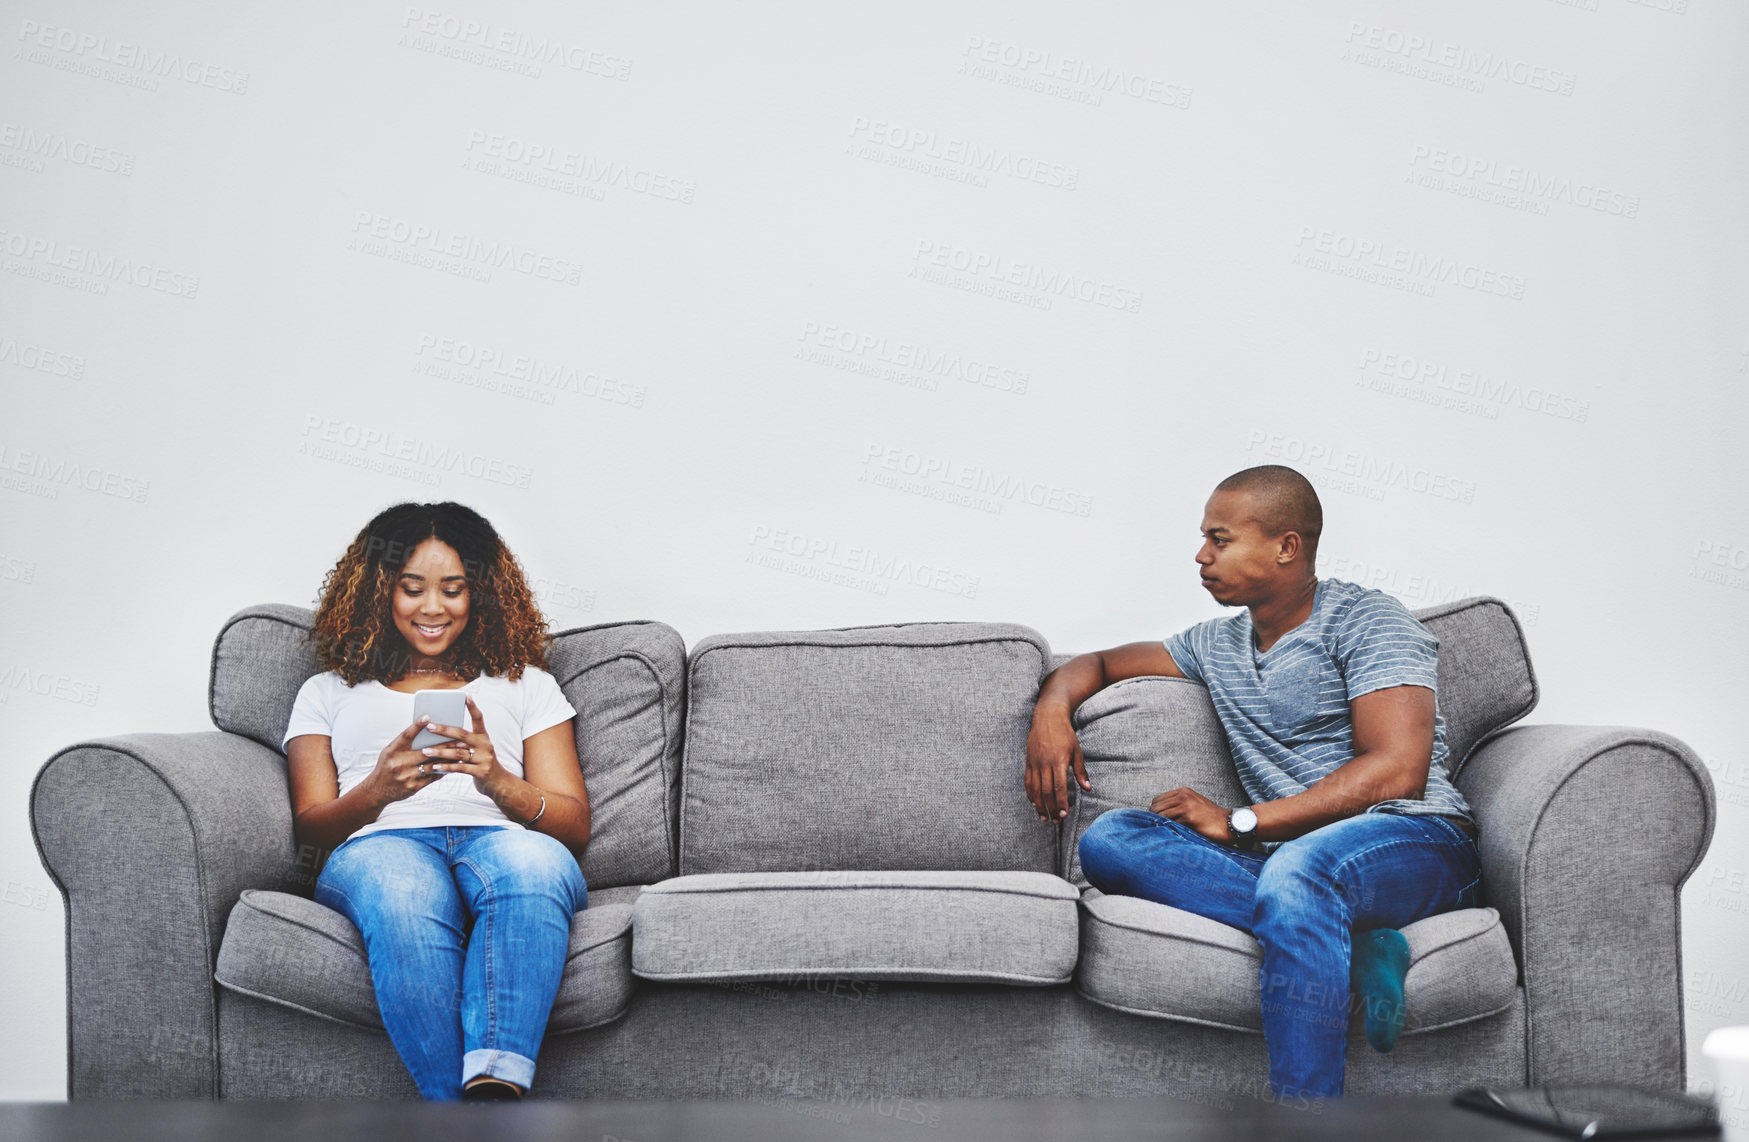 Buy stock photo Shot of a young woman texting on a cellphone while her boyfriend watches in anger